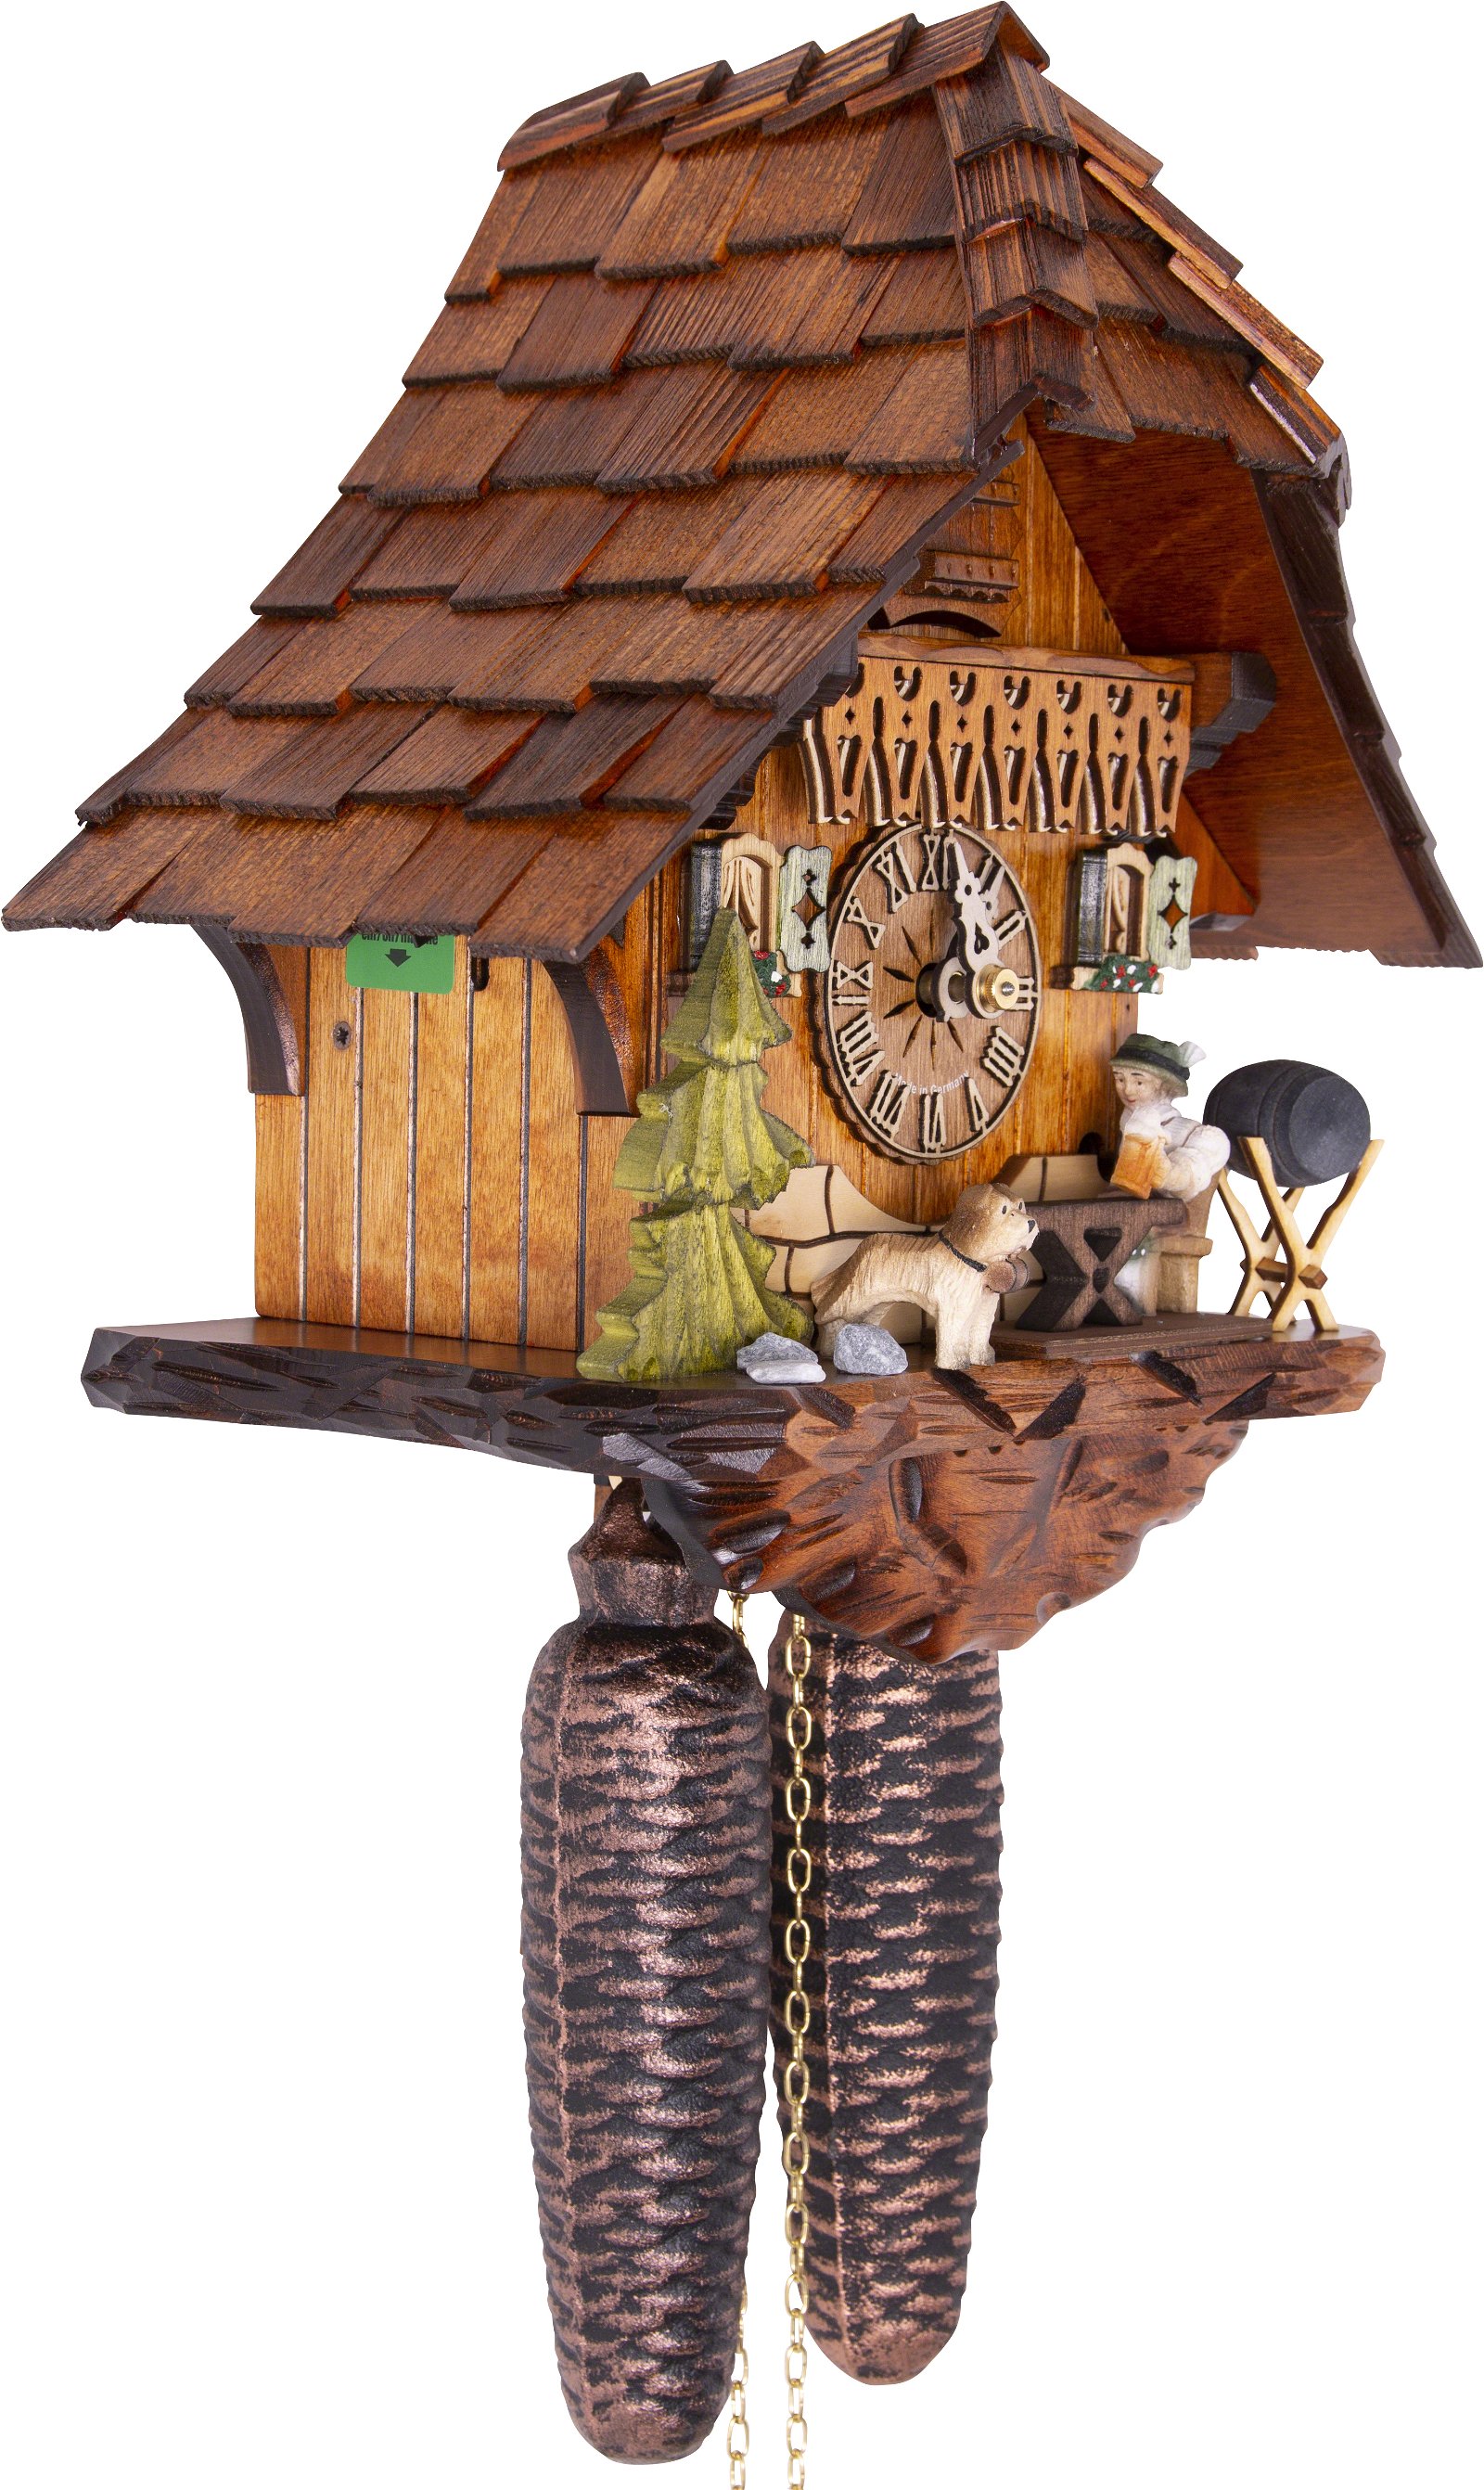 Cuckoo Clock Chalet Style 8 Day Movement 36cm by Hekas